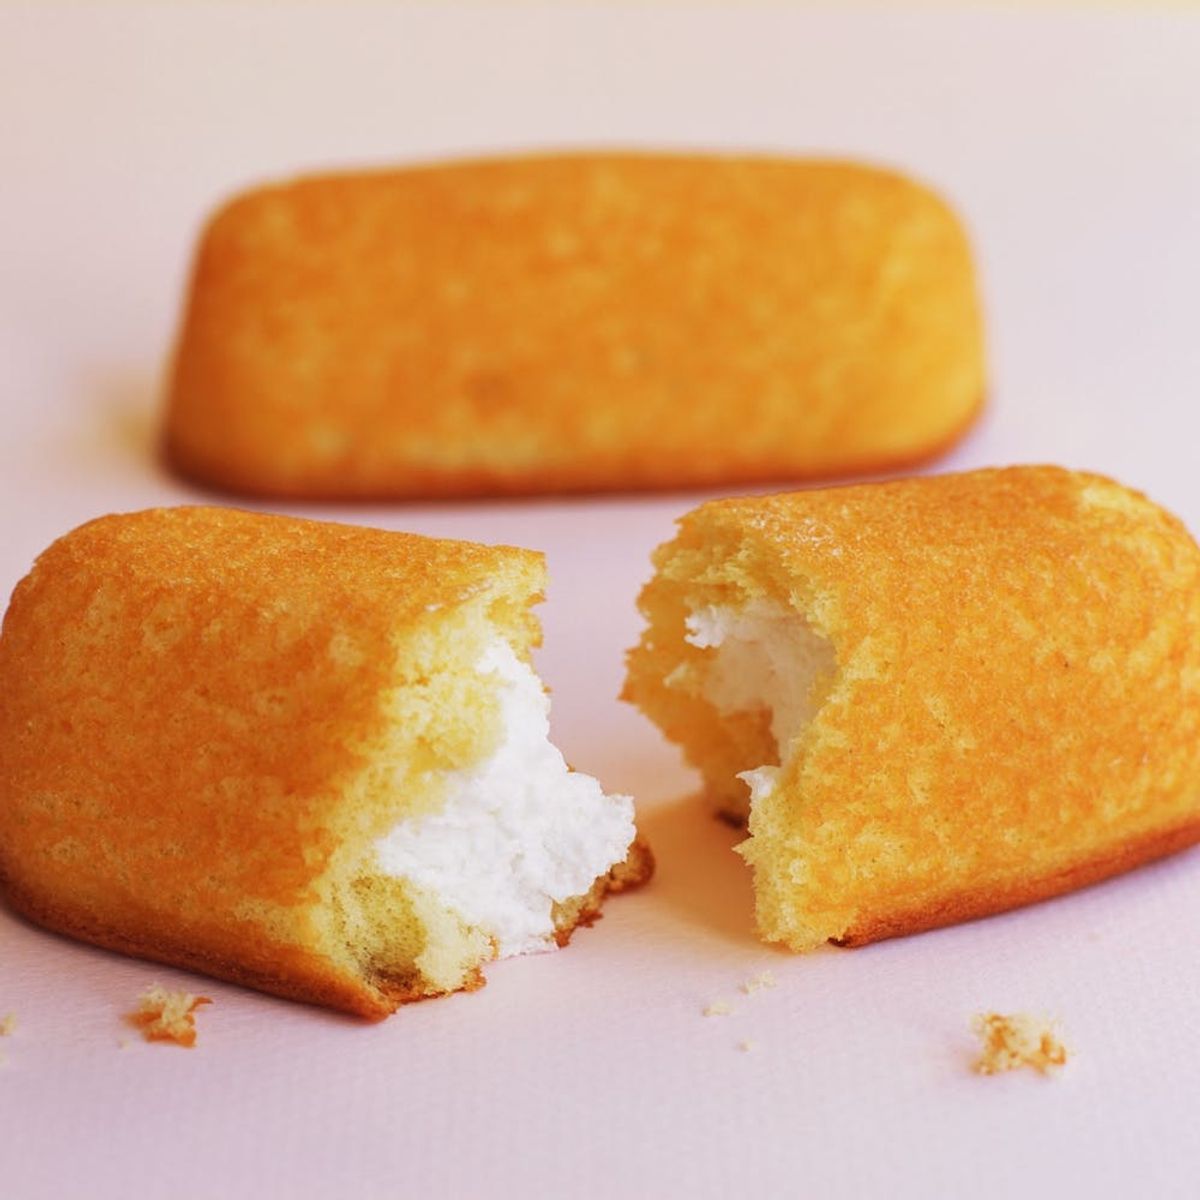 Twinkies Ice Cream Is Now a Thing and We’re Officially Psyched